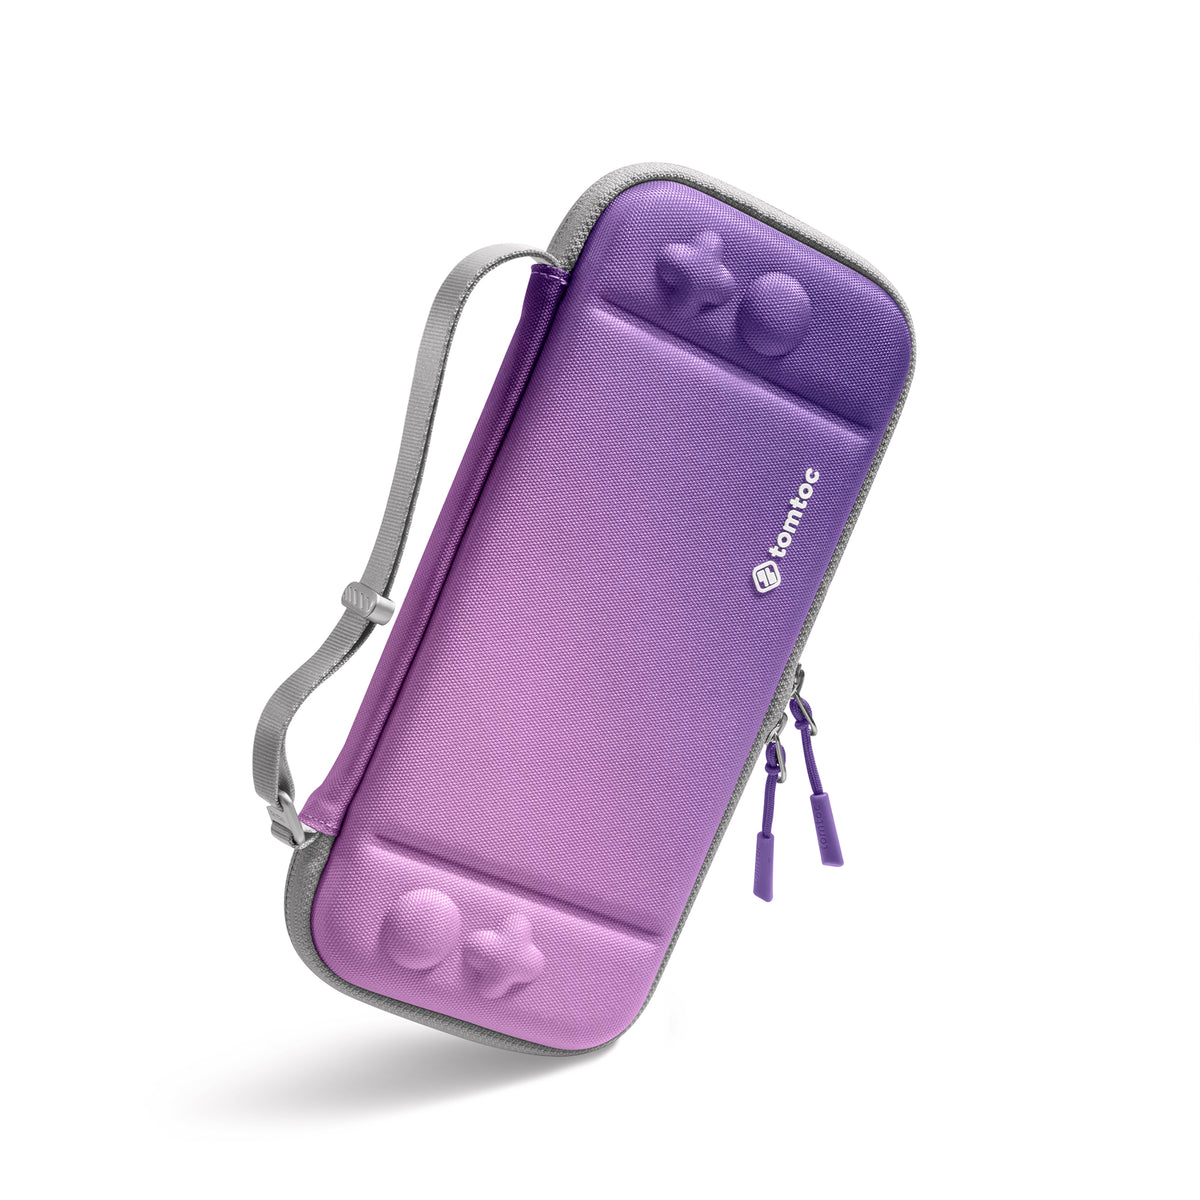 tomtoc Slim Protective Carrying Case with 10 Game Cartridges - Nintendo Switch & OLED Model - Iris Purple